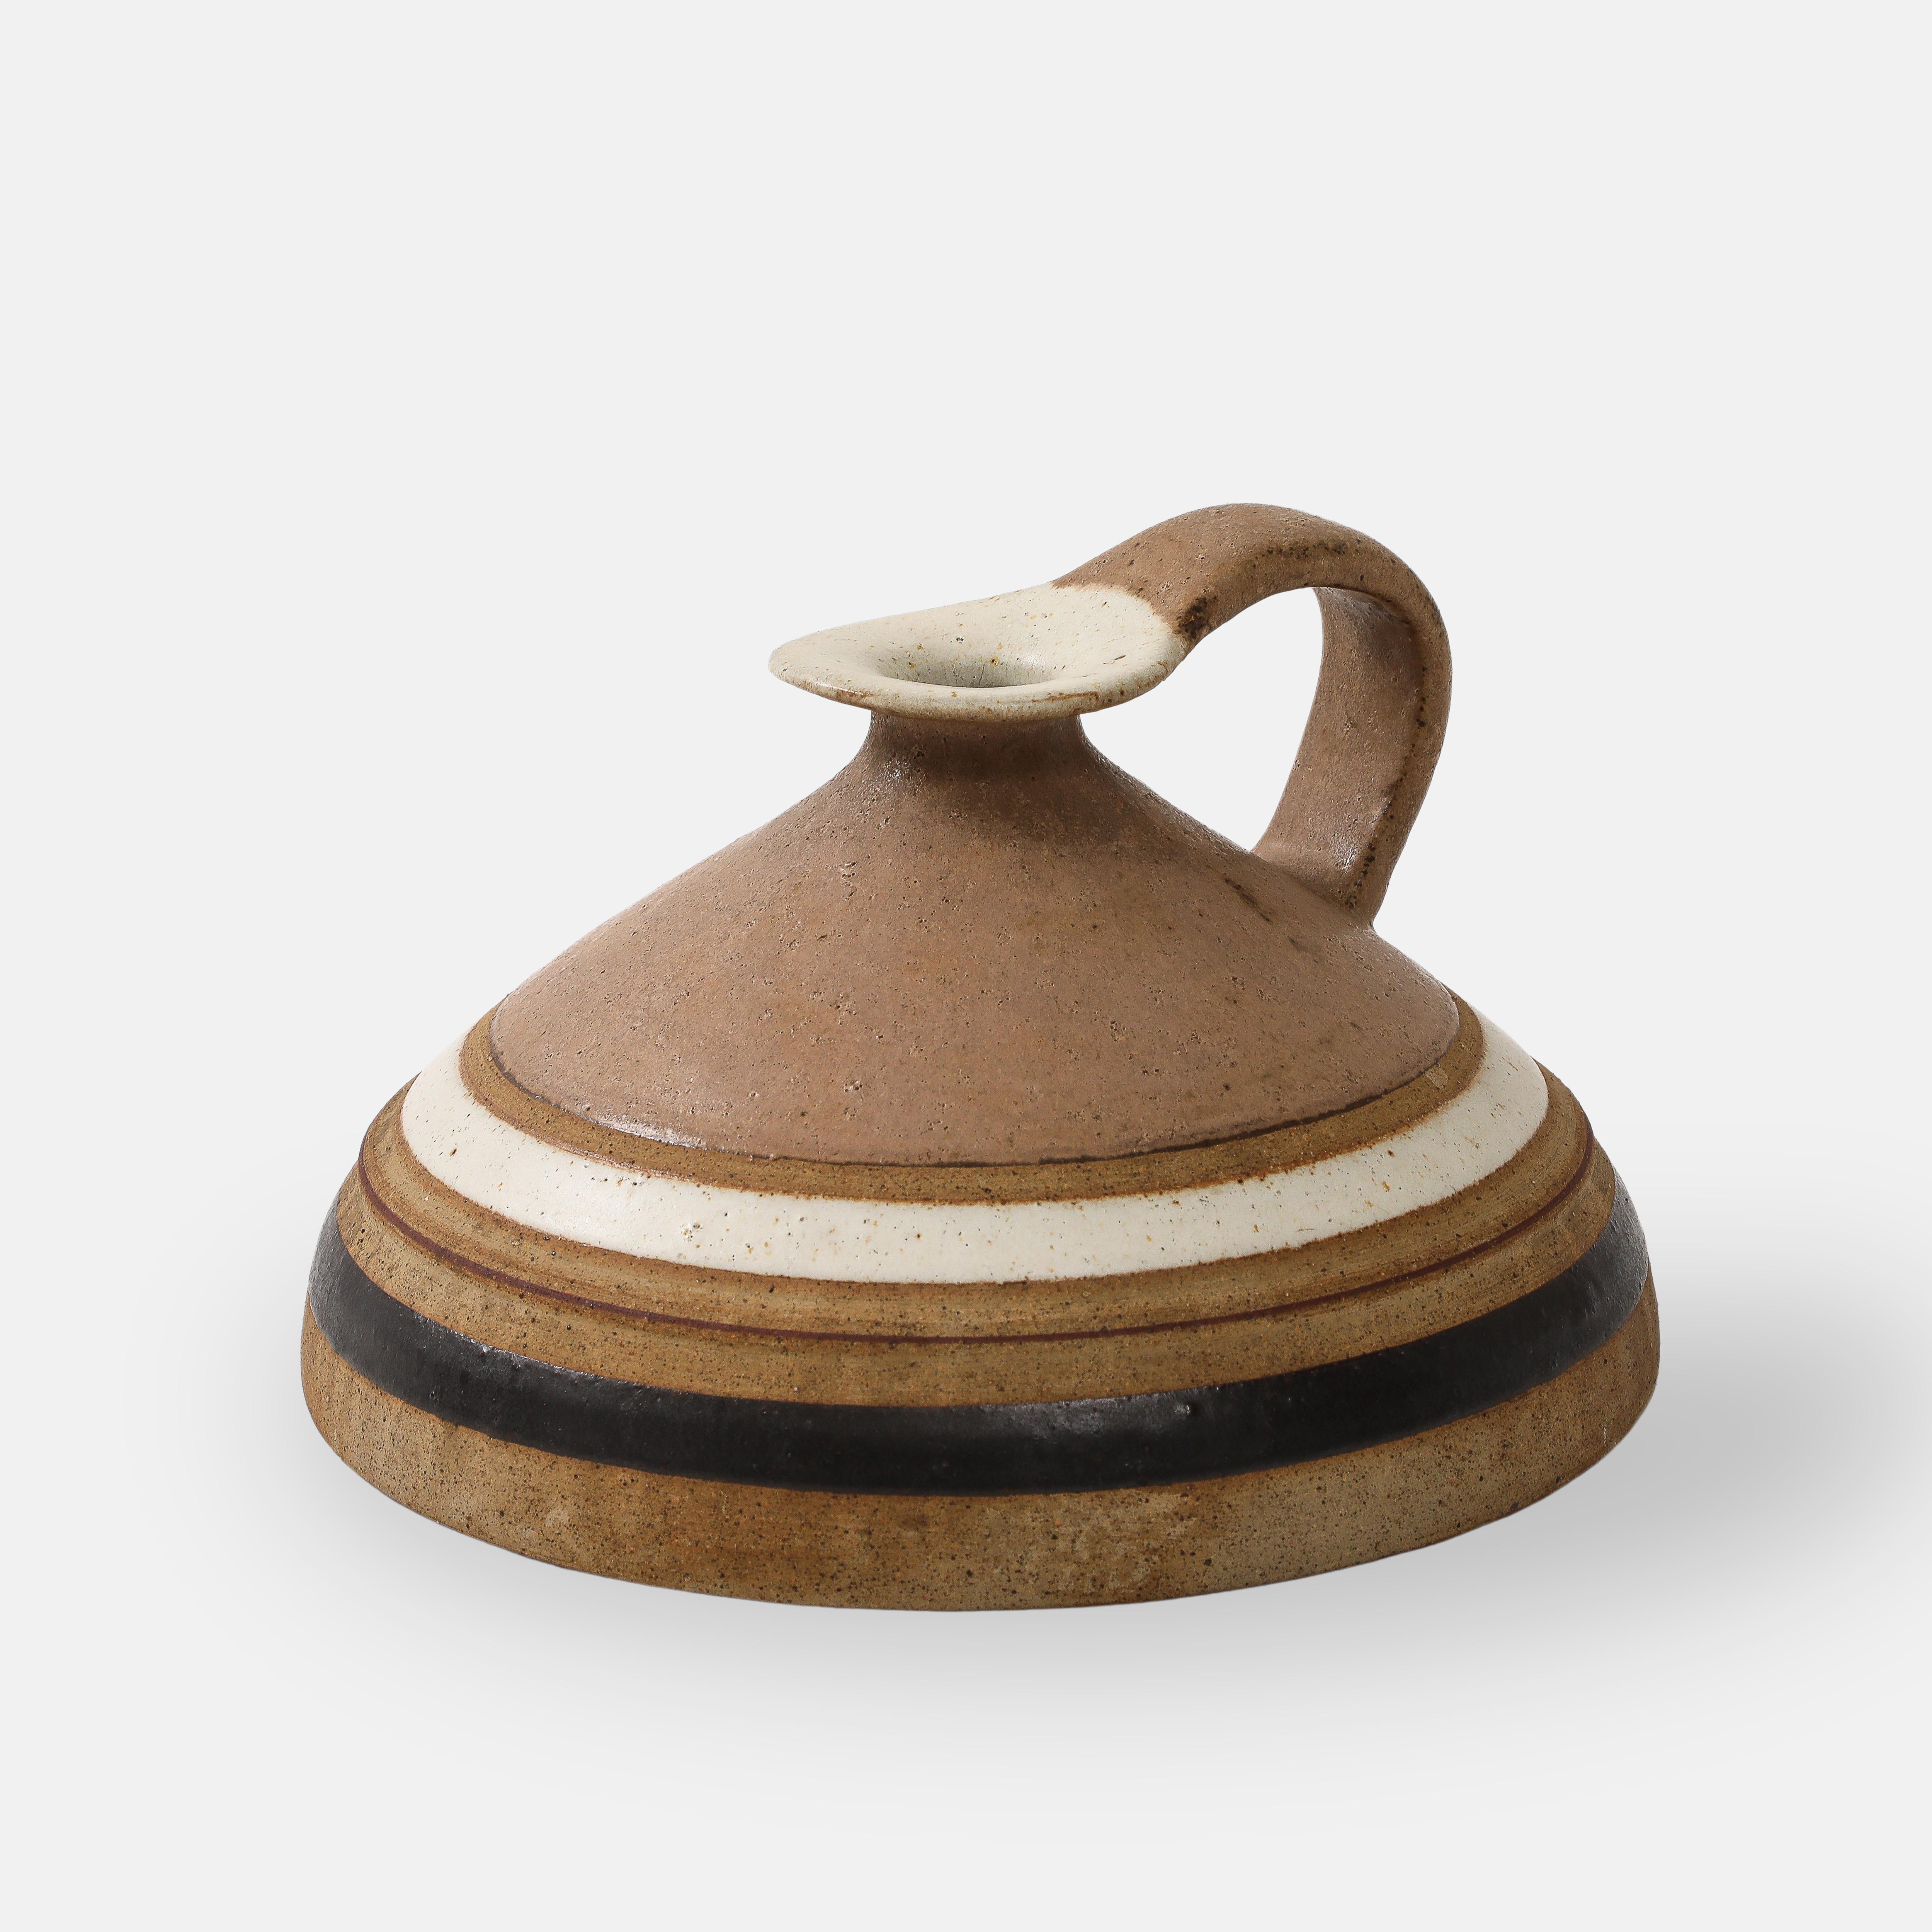 Bruno Gambone ceramic jug or pitcher with handle in tan or camel glaze including bands of  off-white and dark brown.
Signed on underside 'GAMBONE ITALY.'